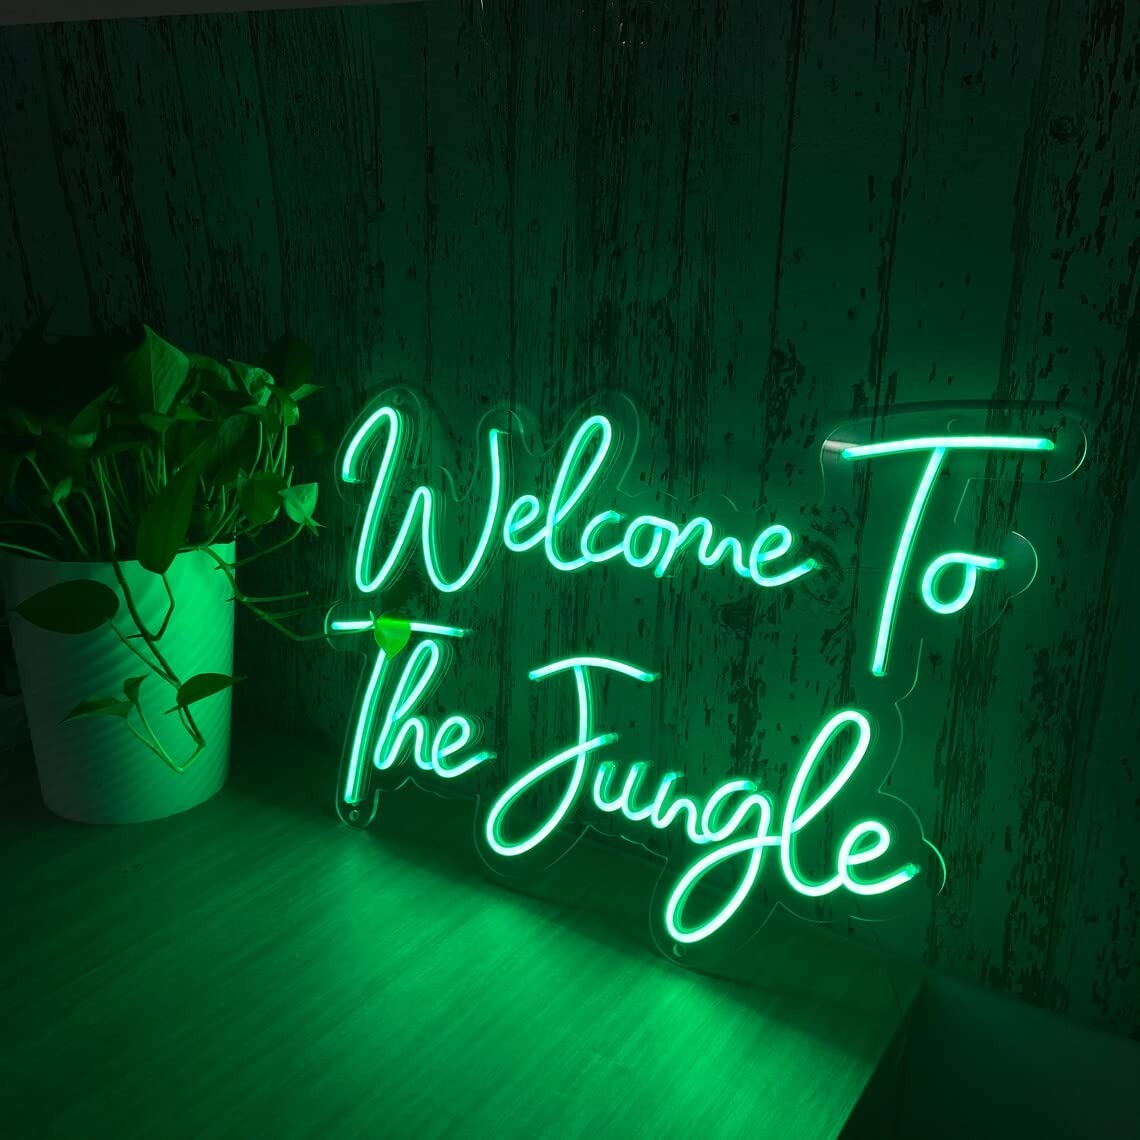 Custom neon welcome sign - A unique greeting